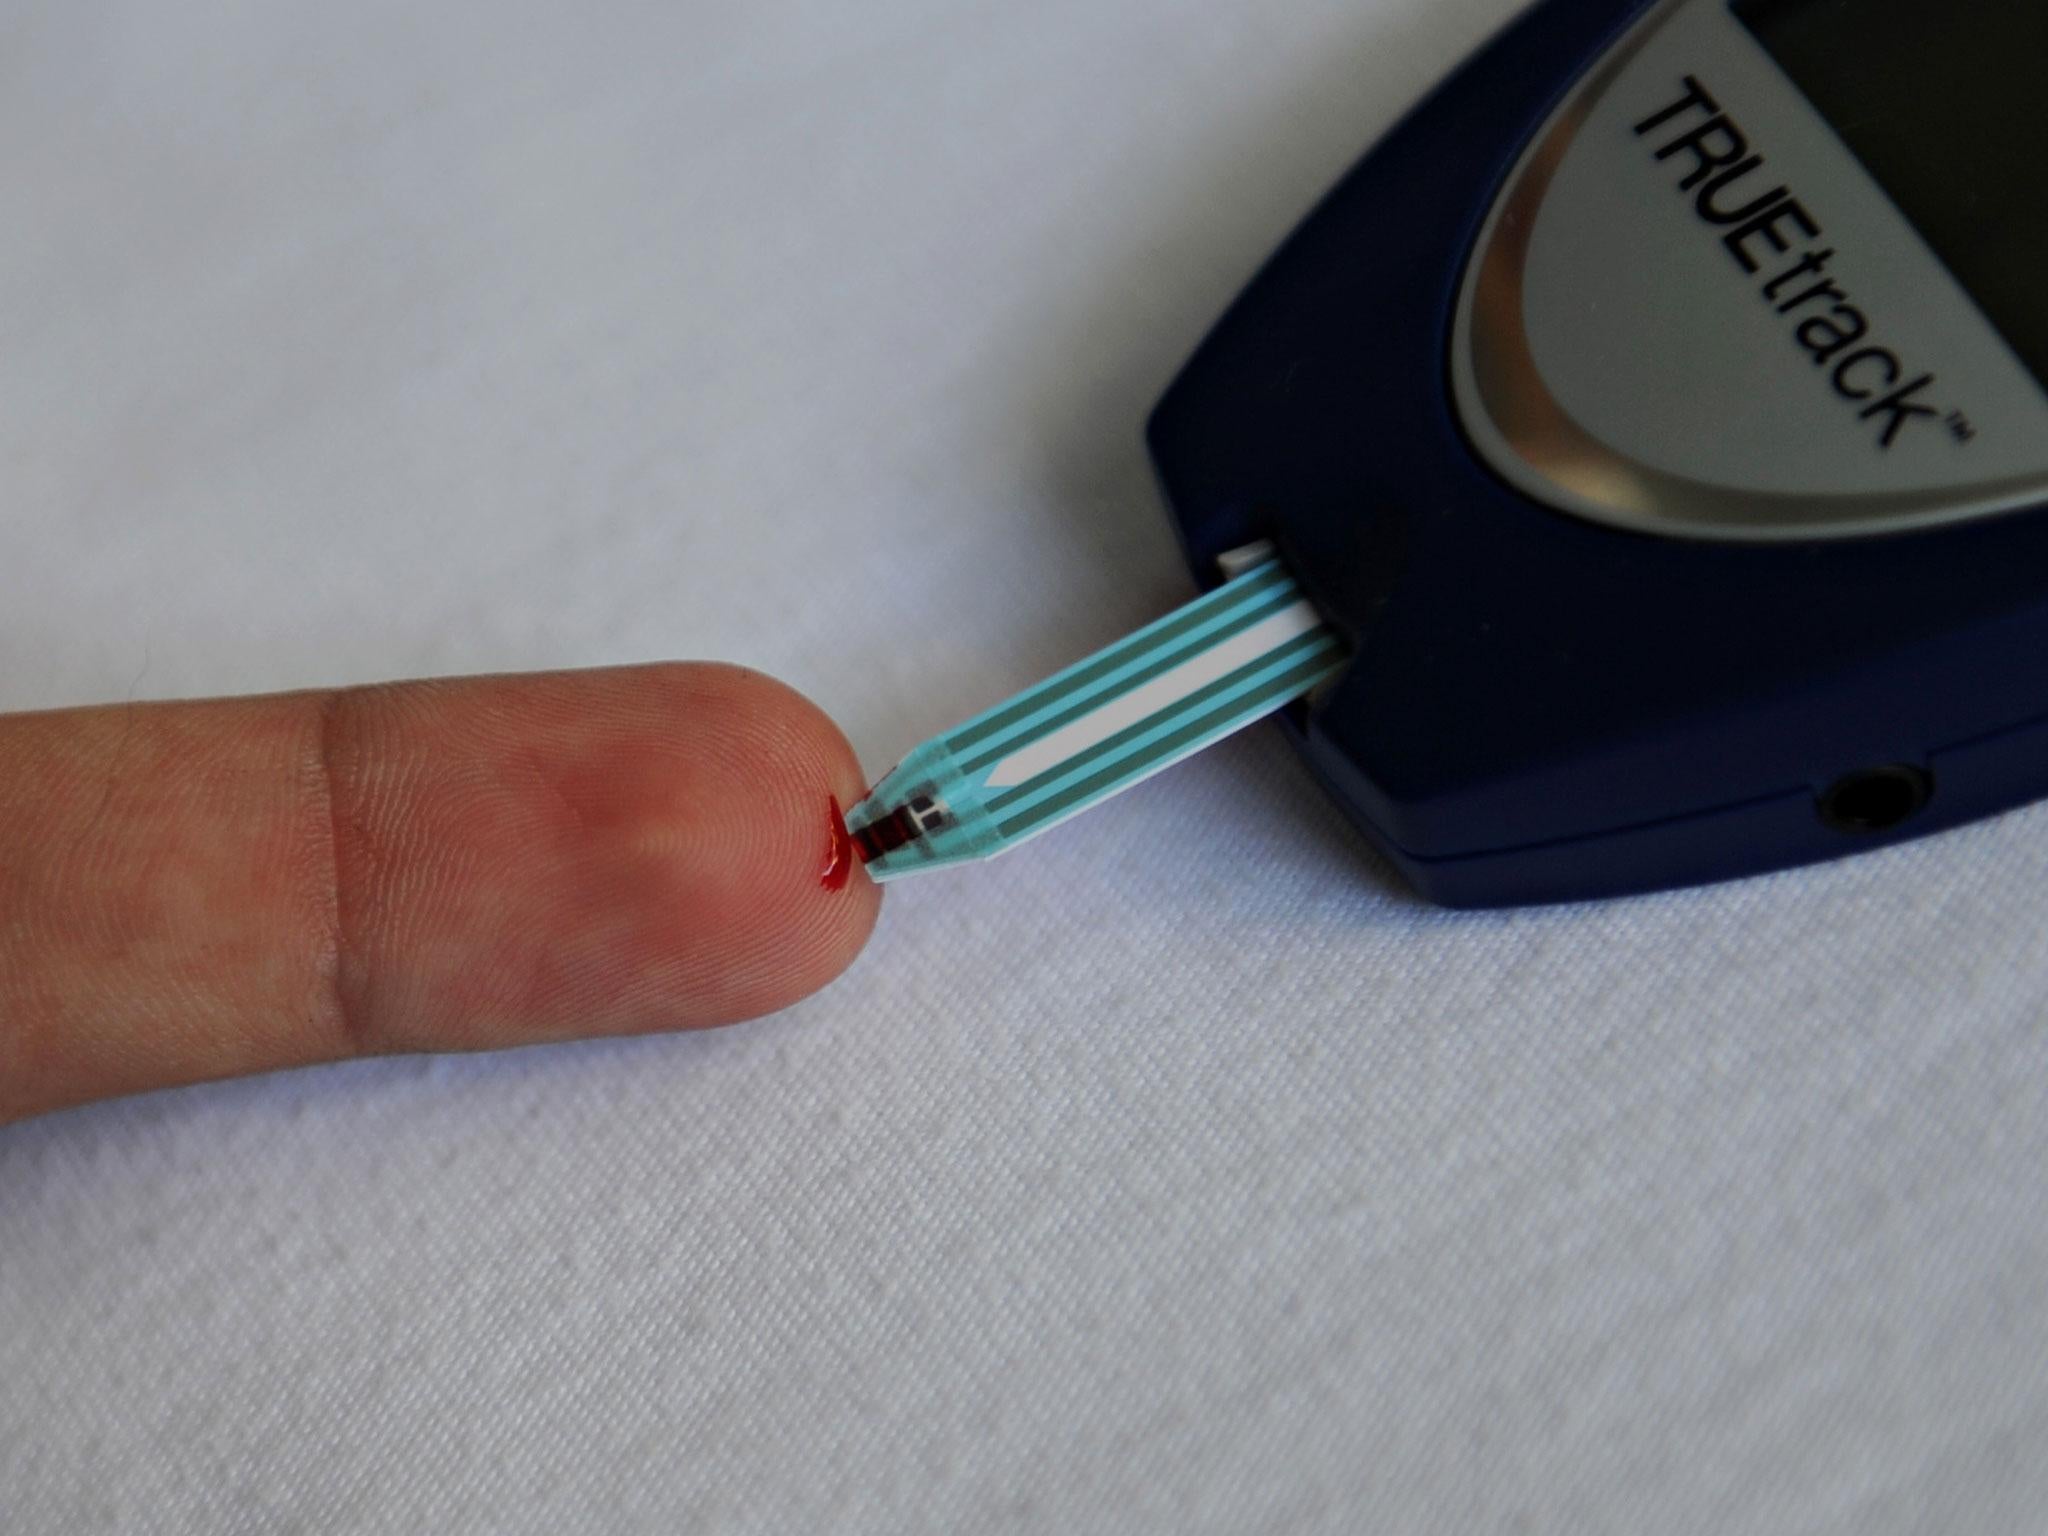 There could soon be a prevention or cure for type 1 diabetes